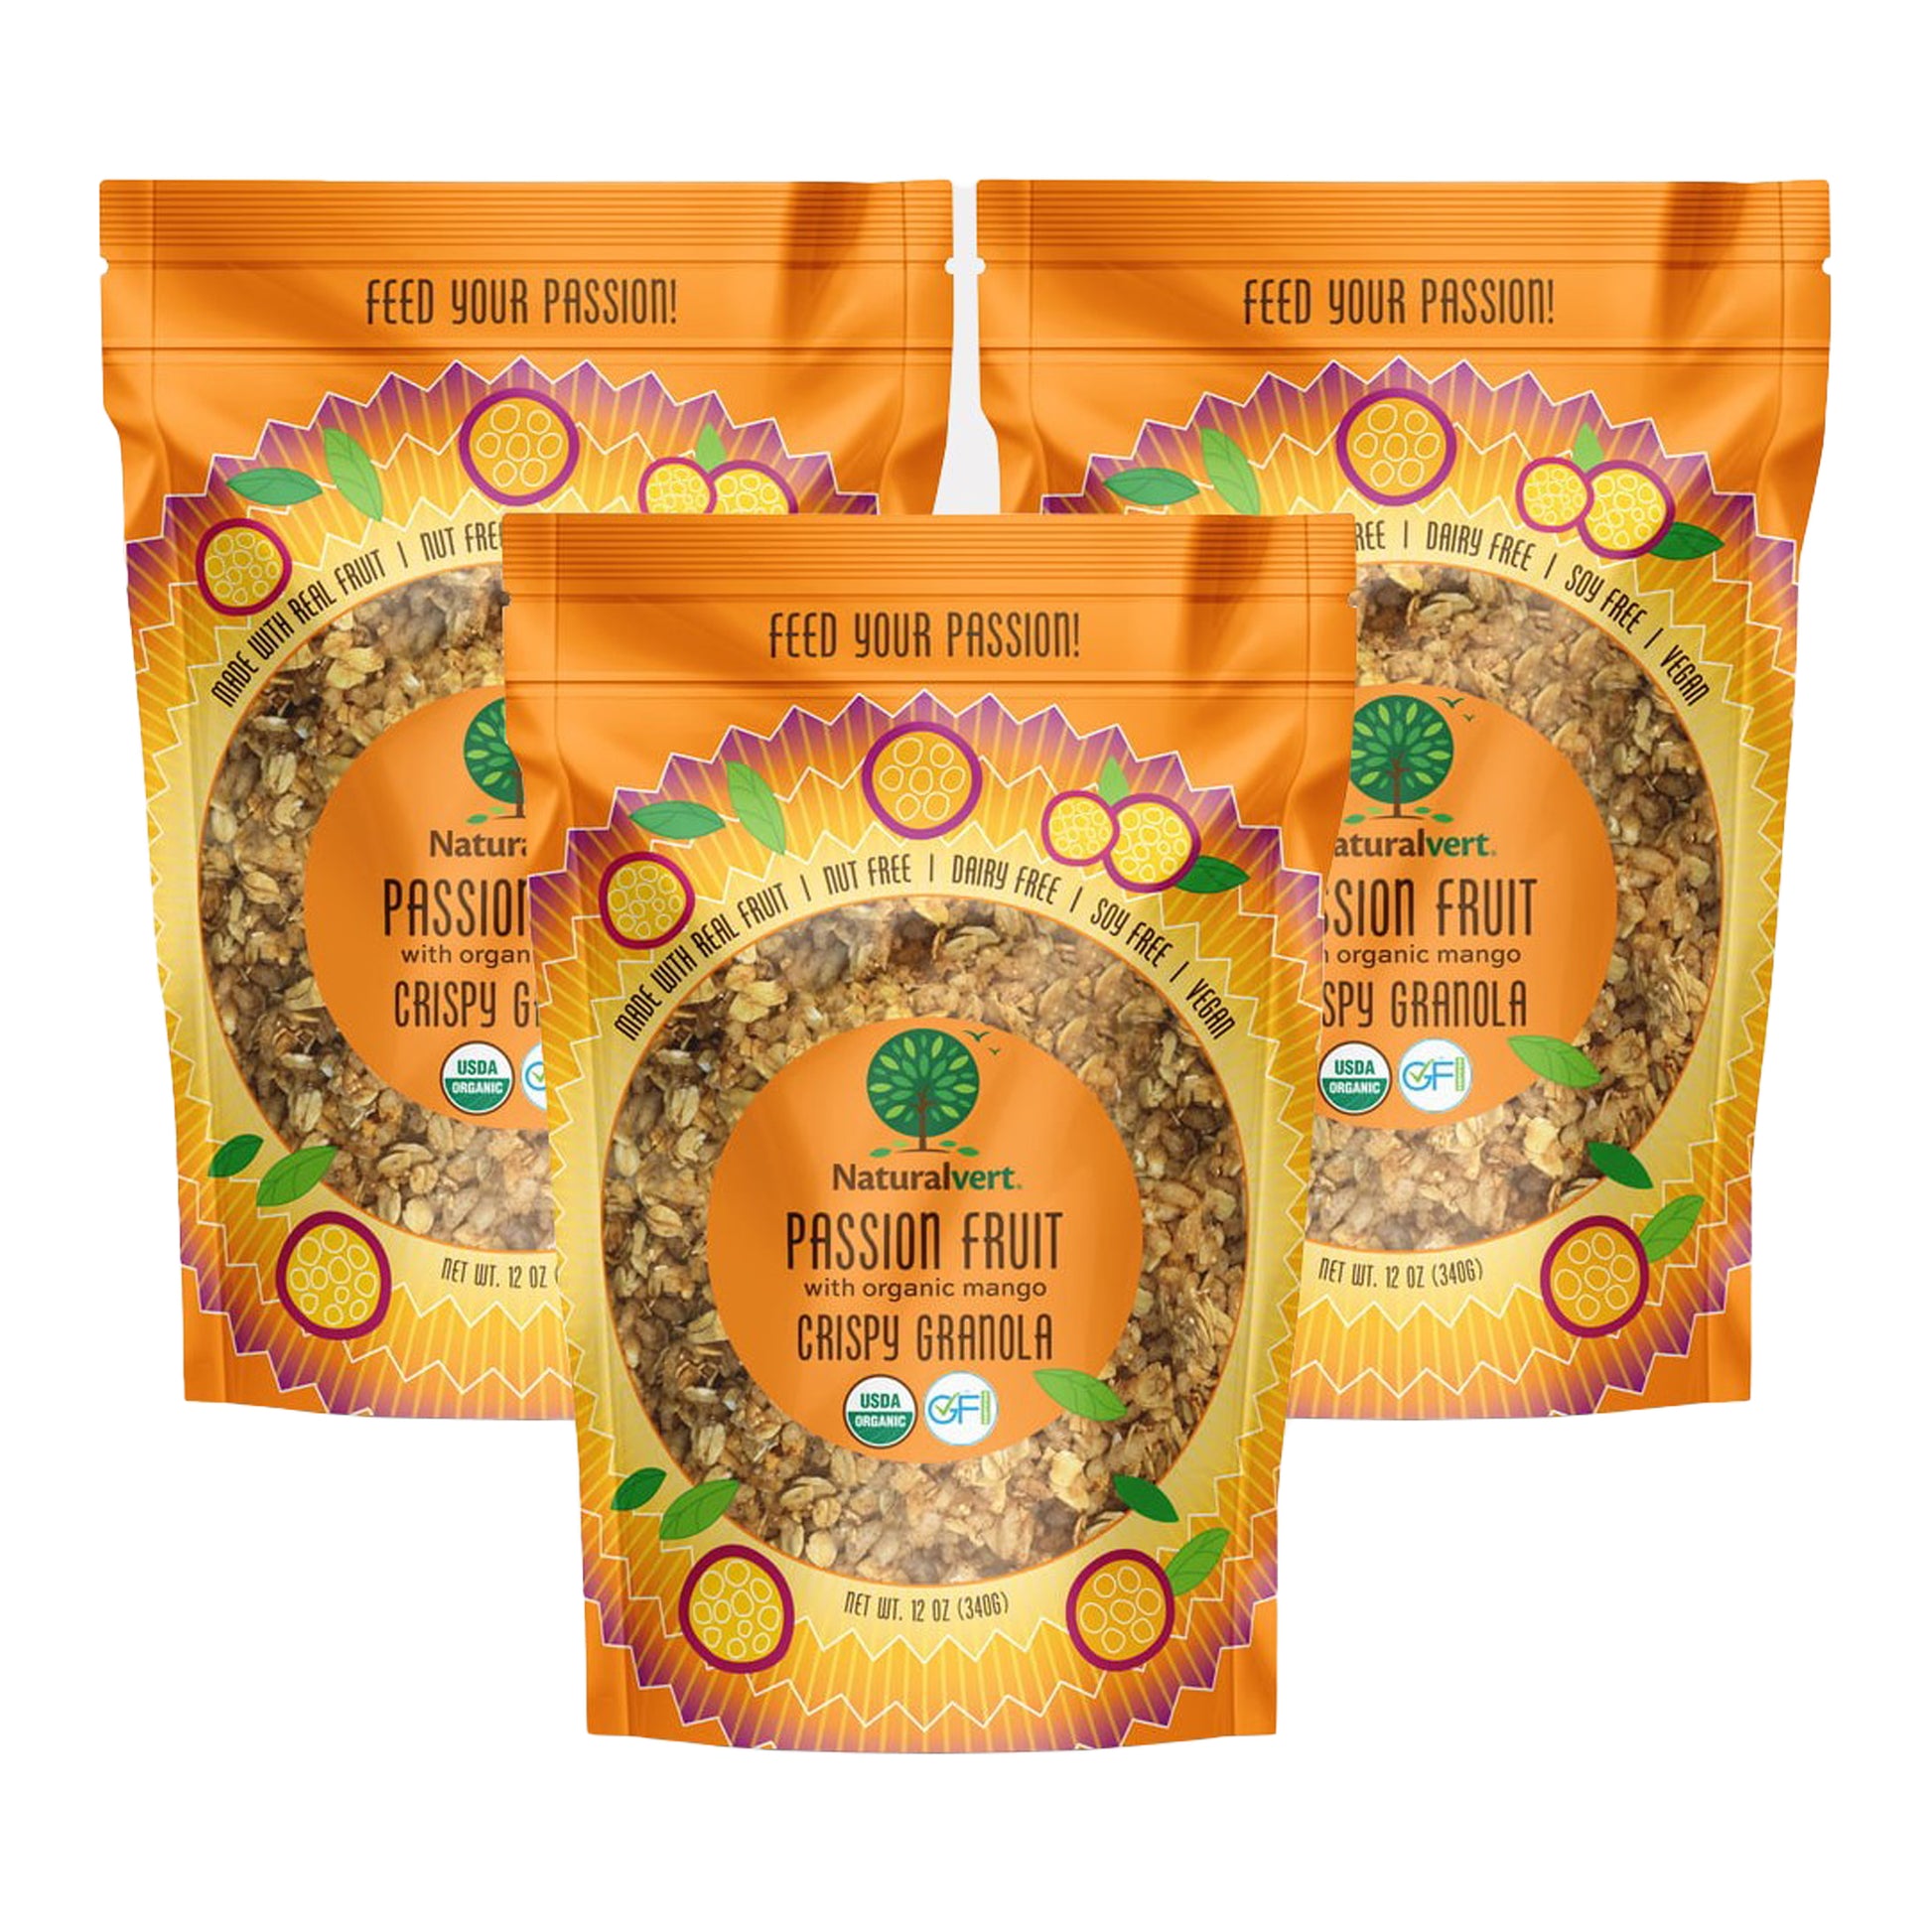 Organic, Gluten-free, vegan granola.  made with real fruit.  Nut free, soy free, dairy free.  Flavor Passion Fruit mango.